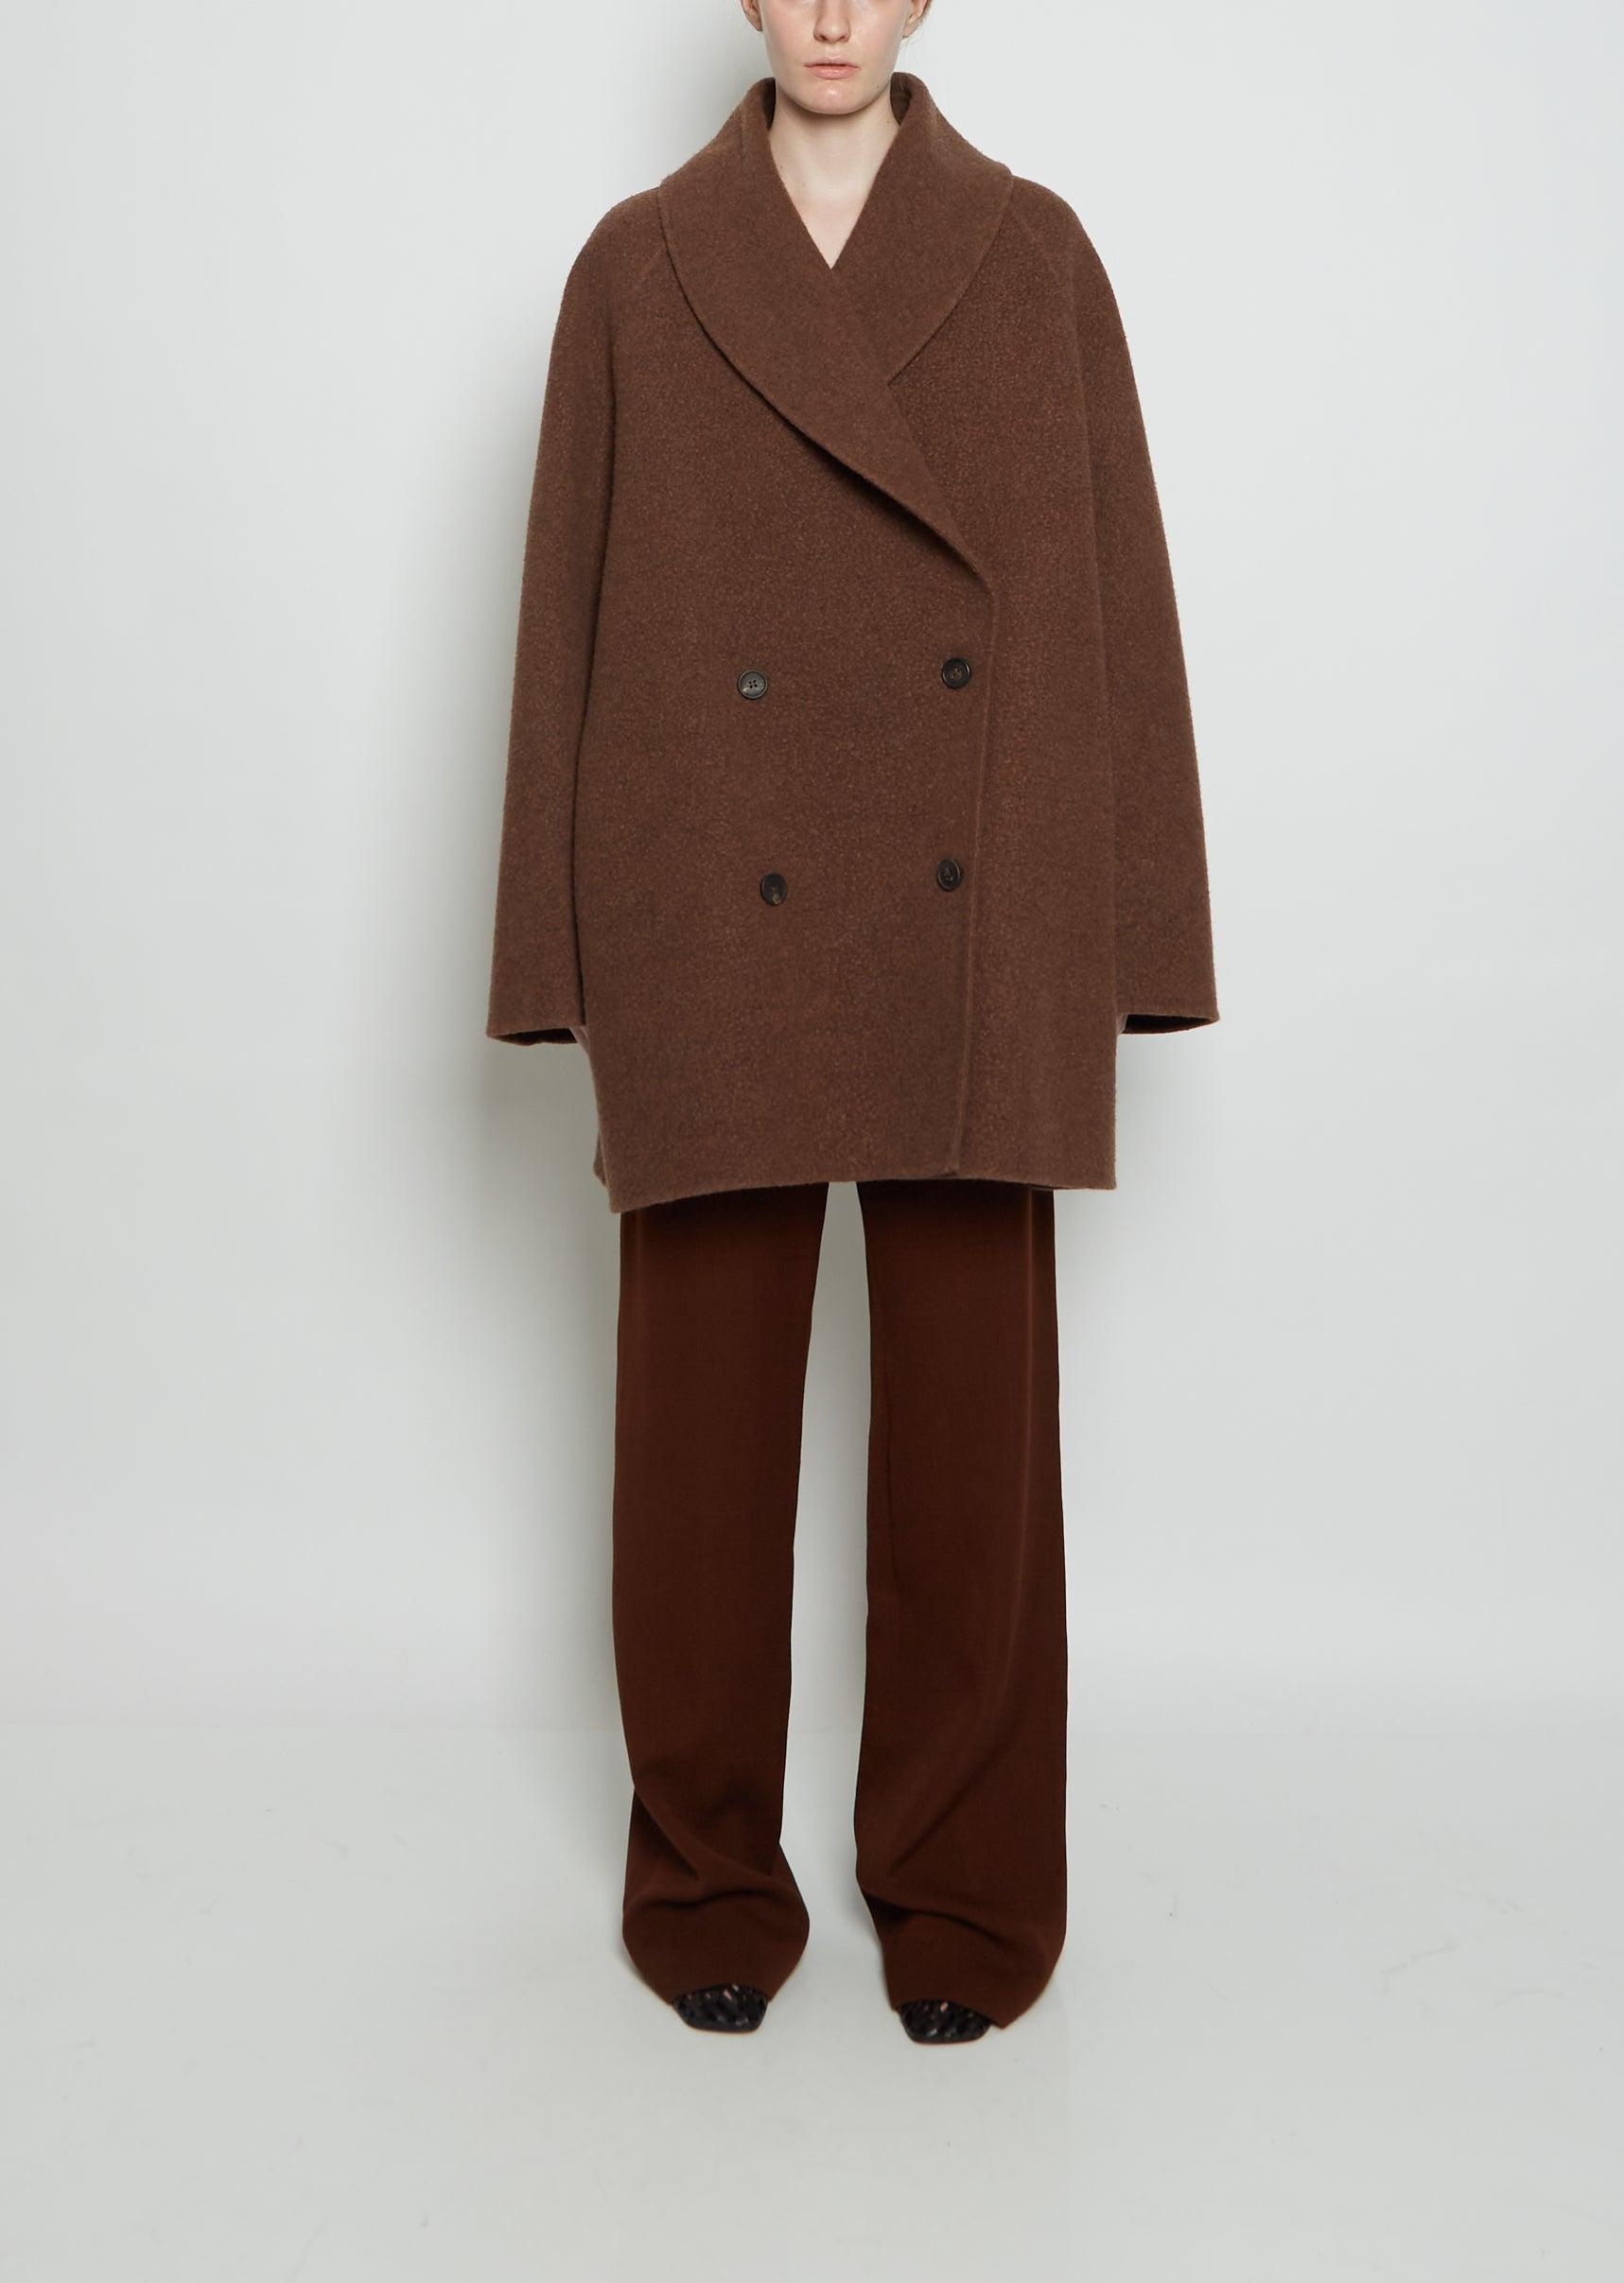 The Row Wool & Cashmere Polli Jacket in Brown | Lyst